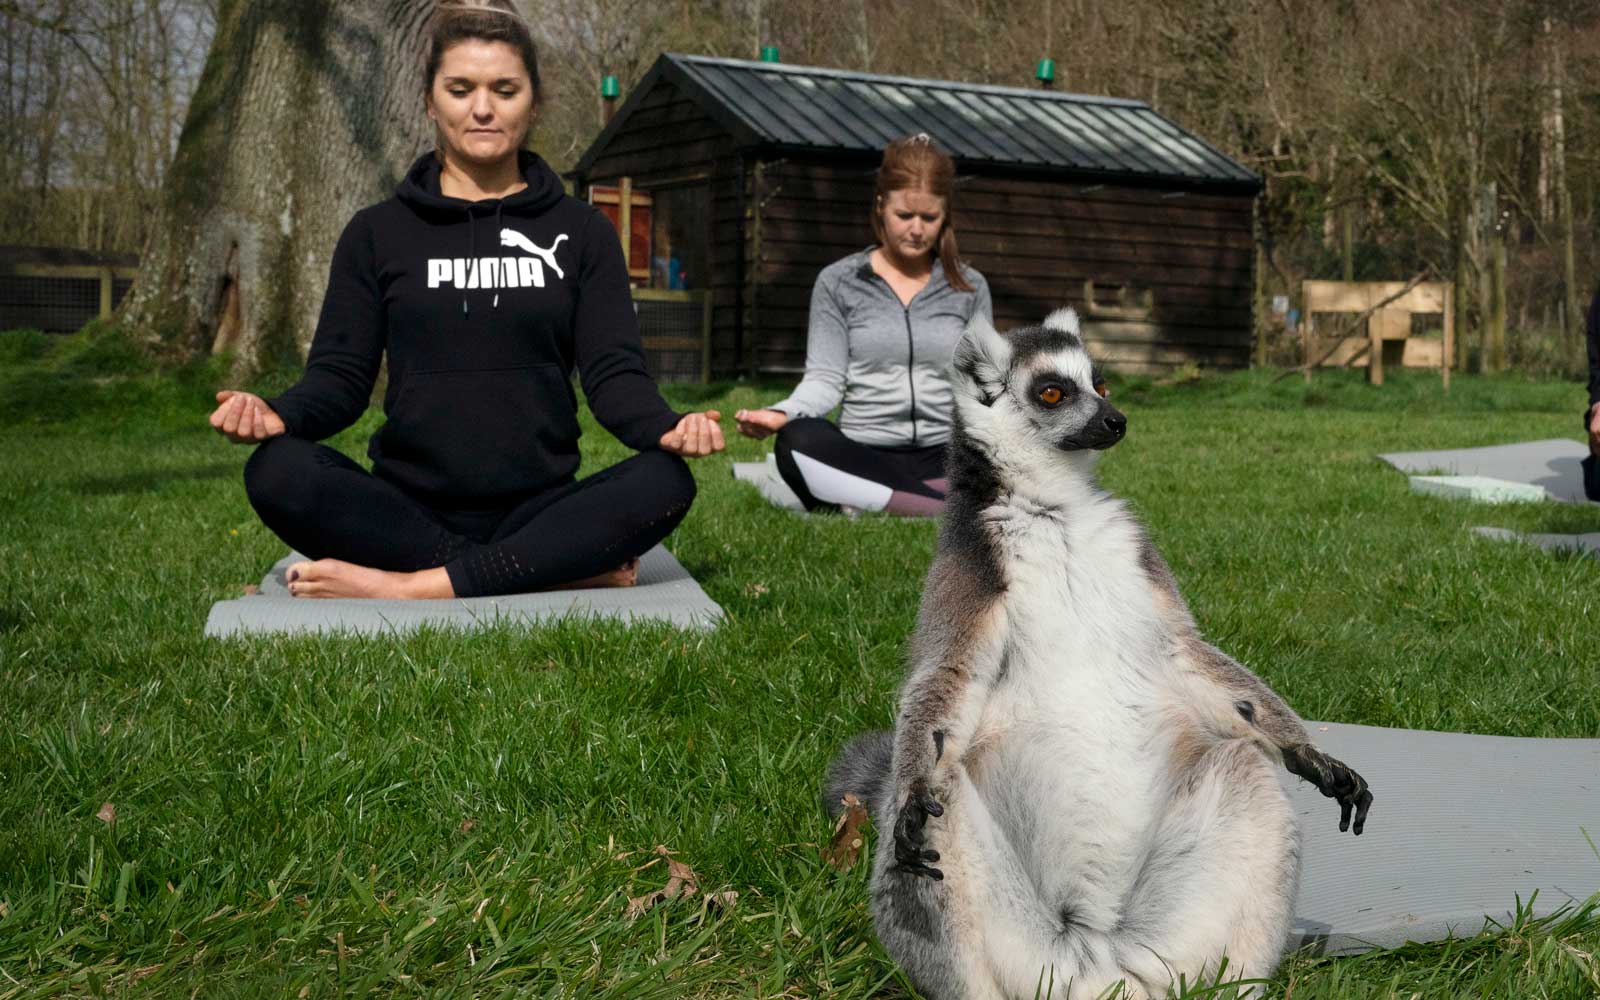 Armathwaite Hall hotel in Keswick, Cumbria holds Lemoga classes with the lemurs from Lake District Wild Life Park mingling with the class to create a personal yoga experience which aims to heighten the sense of wellbeing for both lemur and human. (Photo by Owen Humphreys/PA Images via Getty Images)